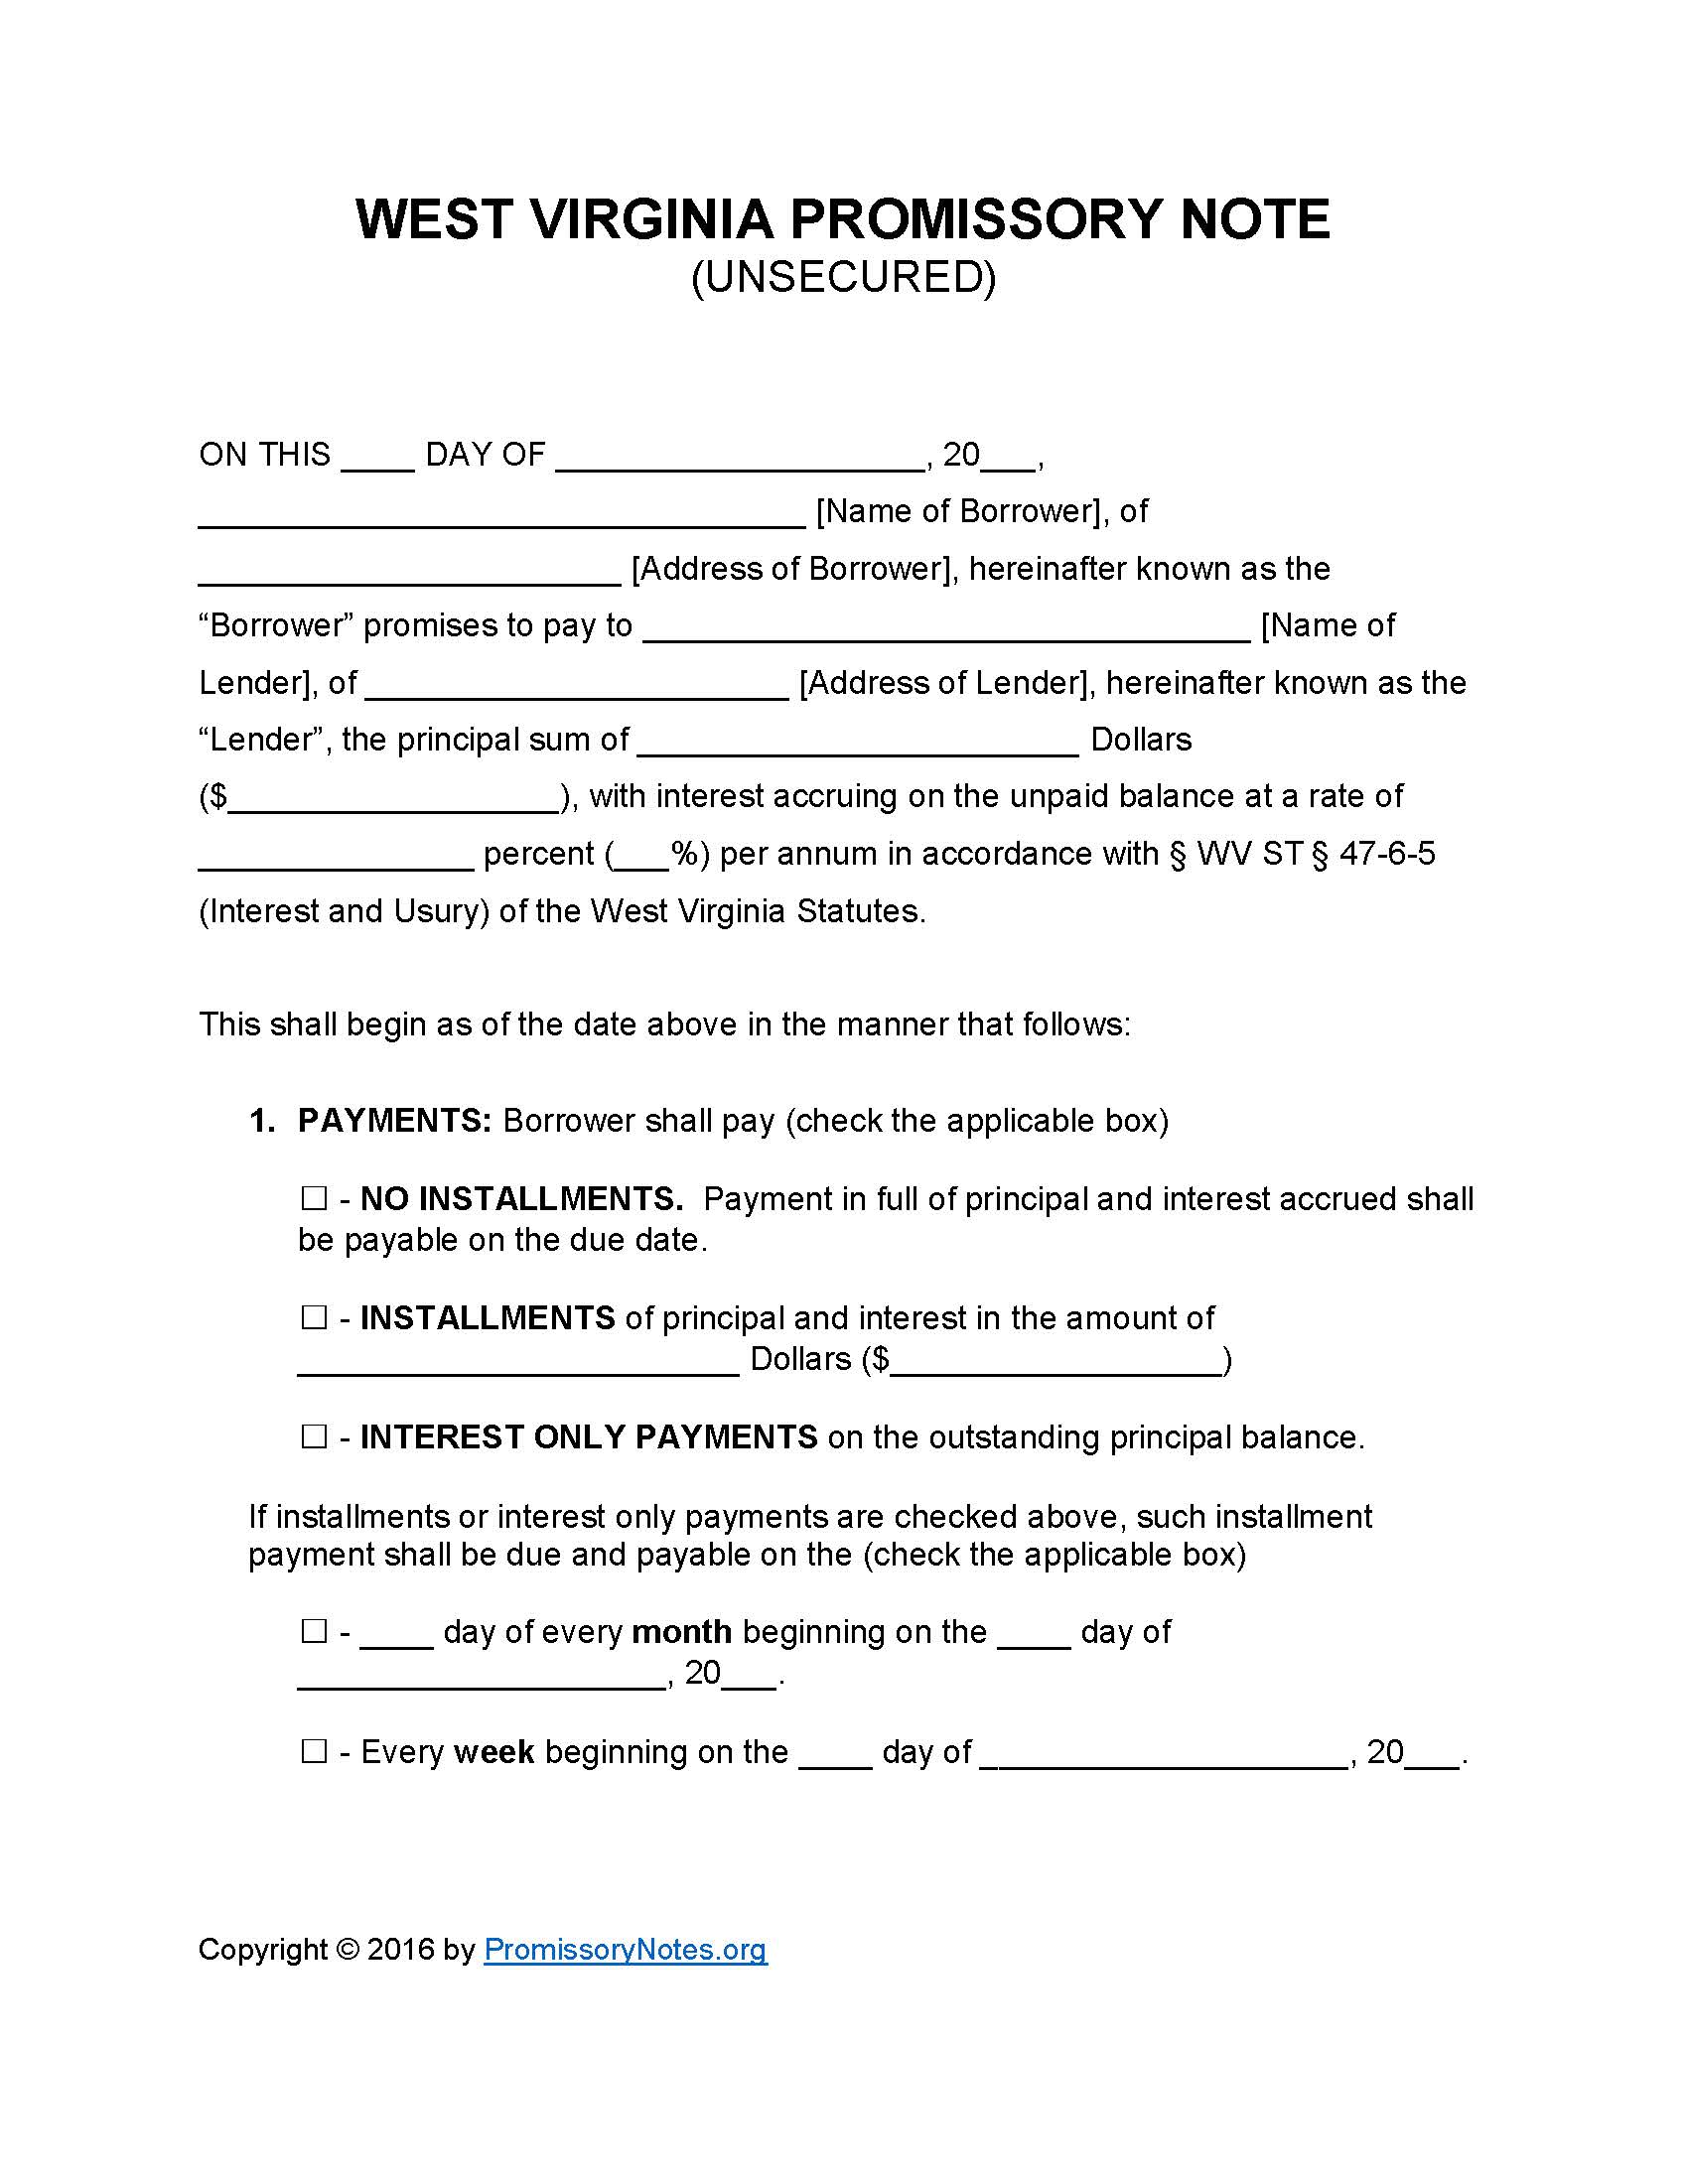 west-virginia-unsecured-promissory-note-form